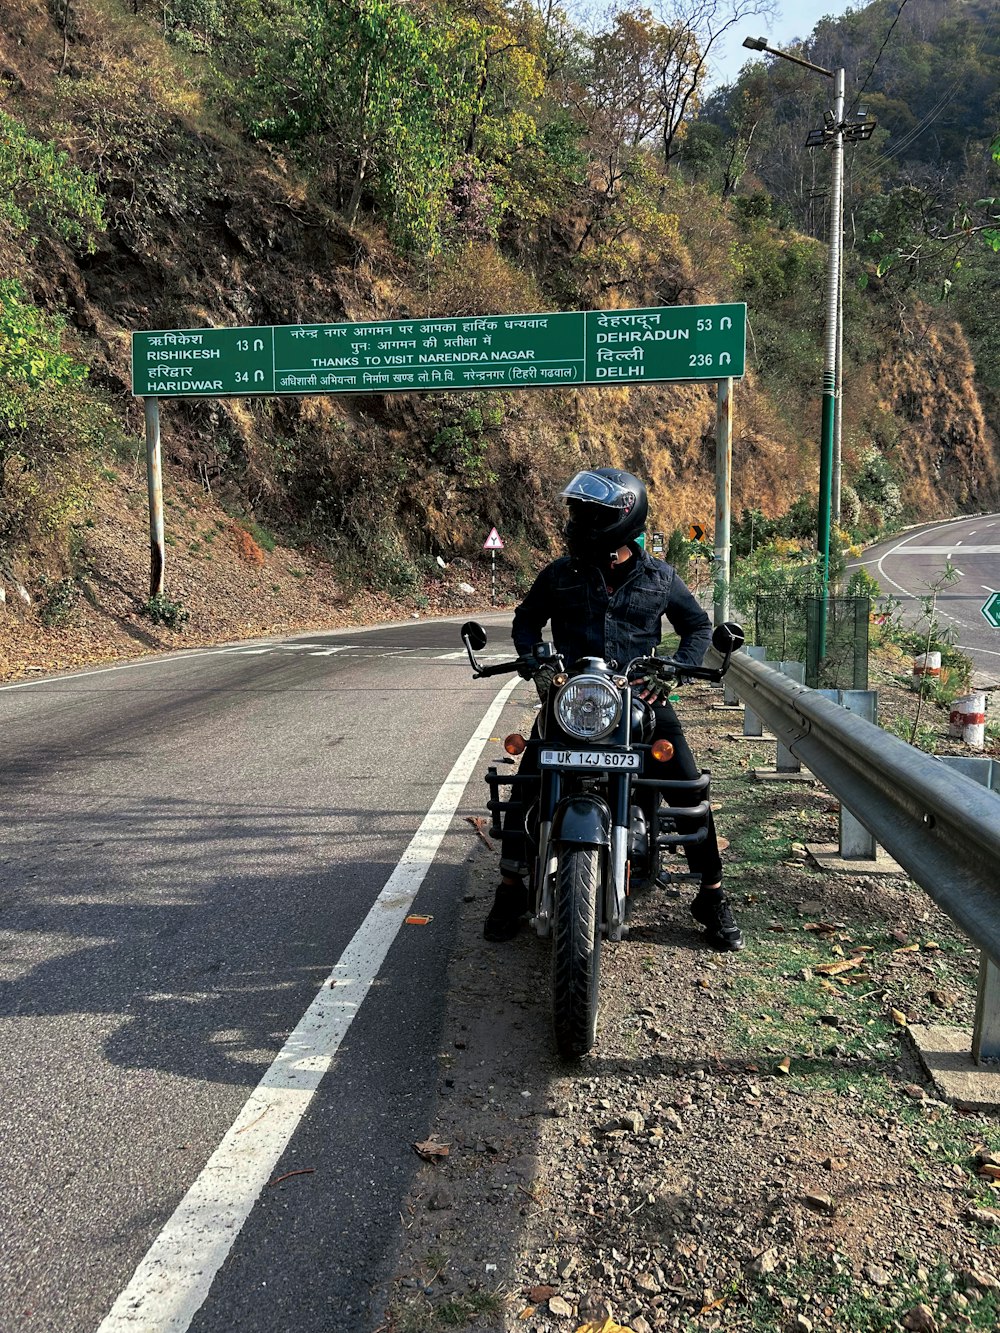 a man riding a motorcycle on the side of a road